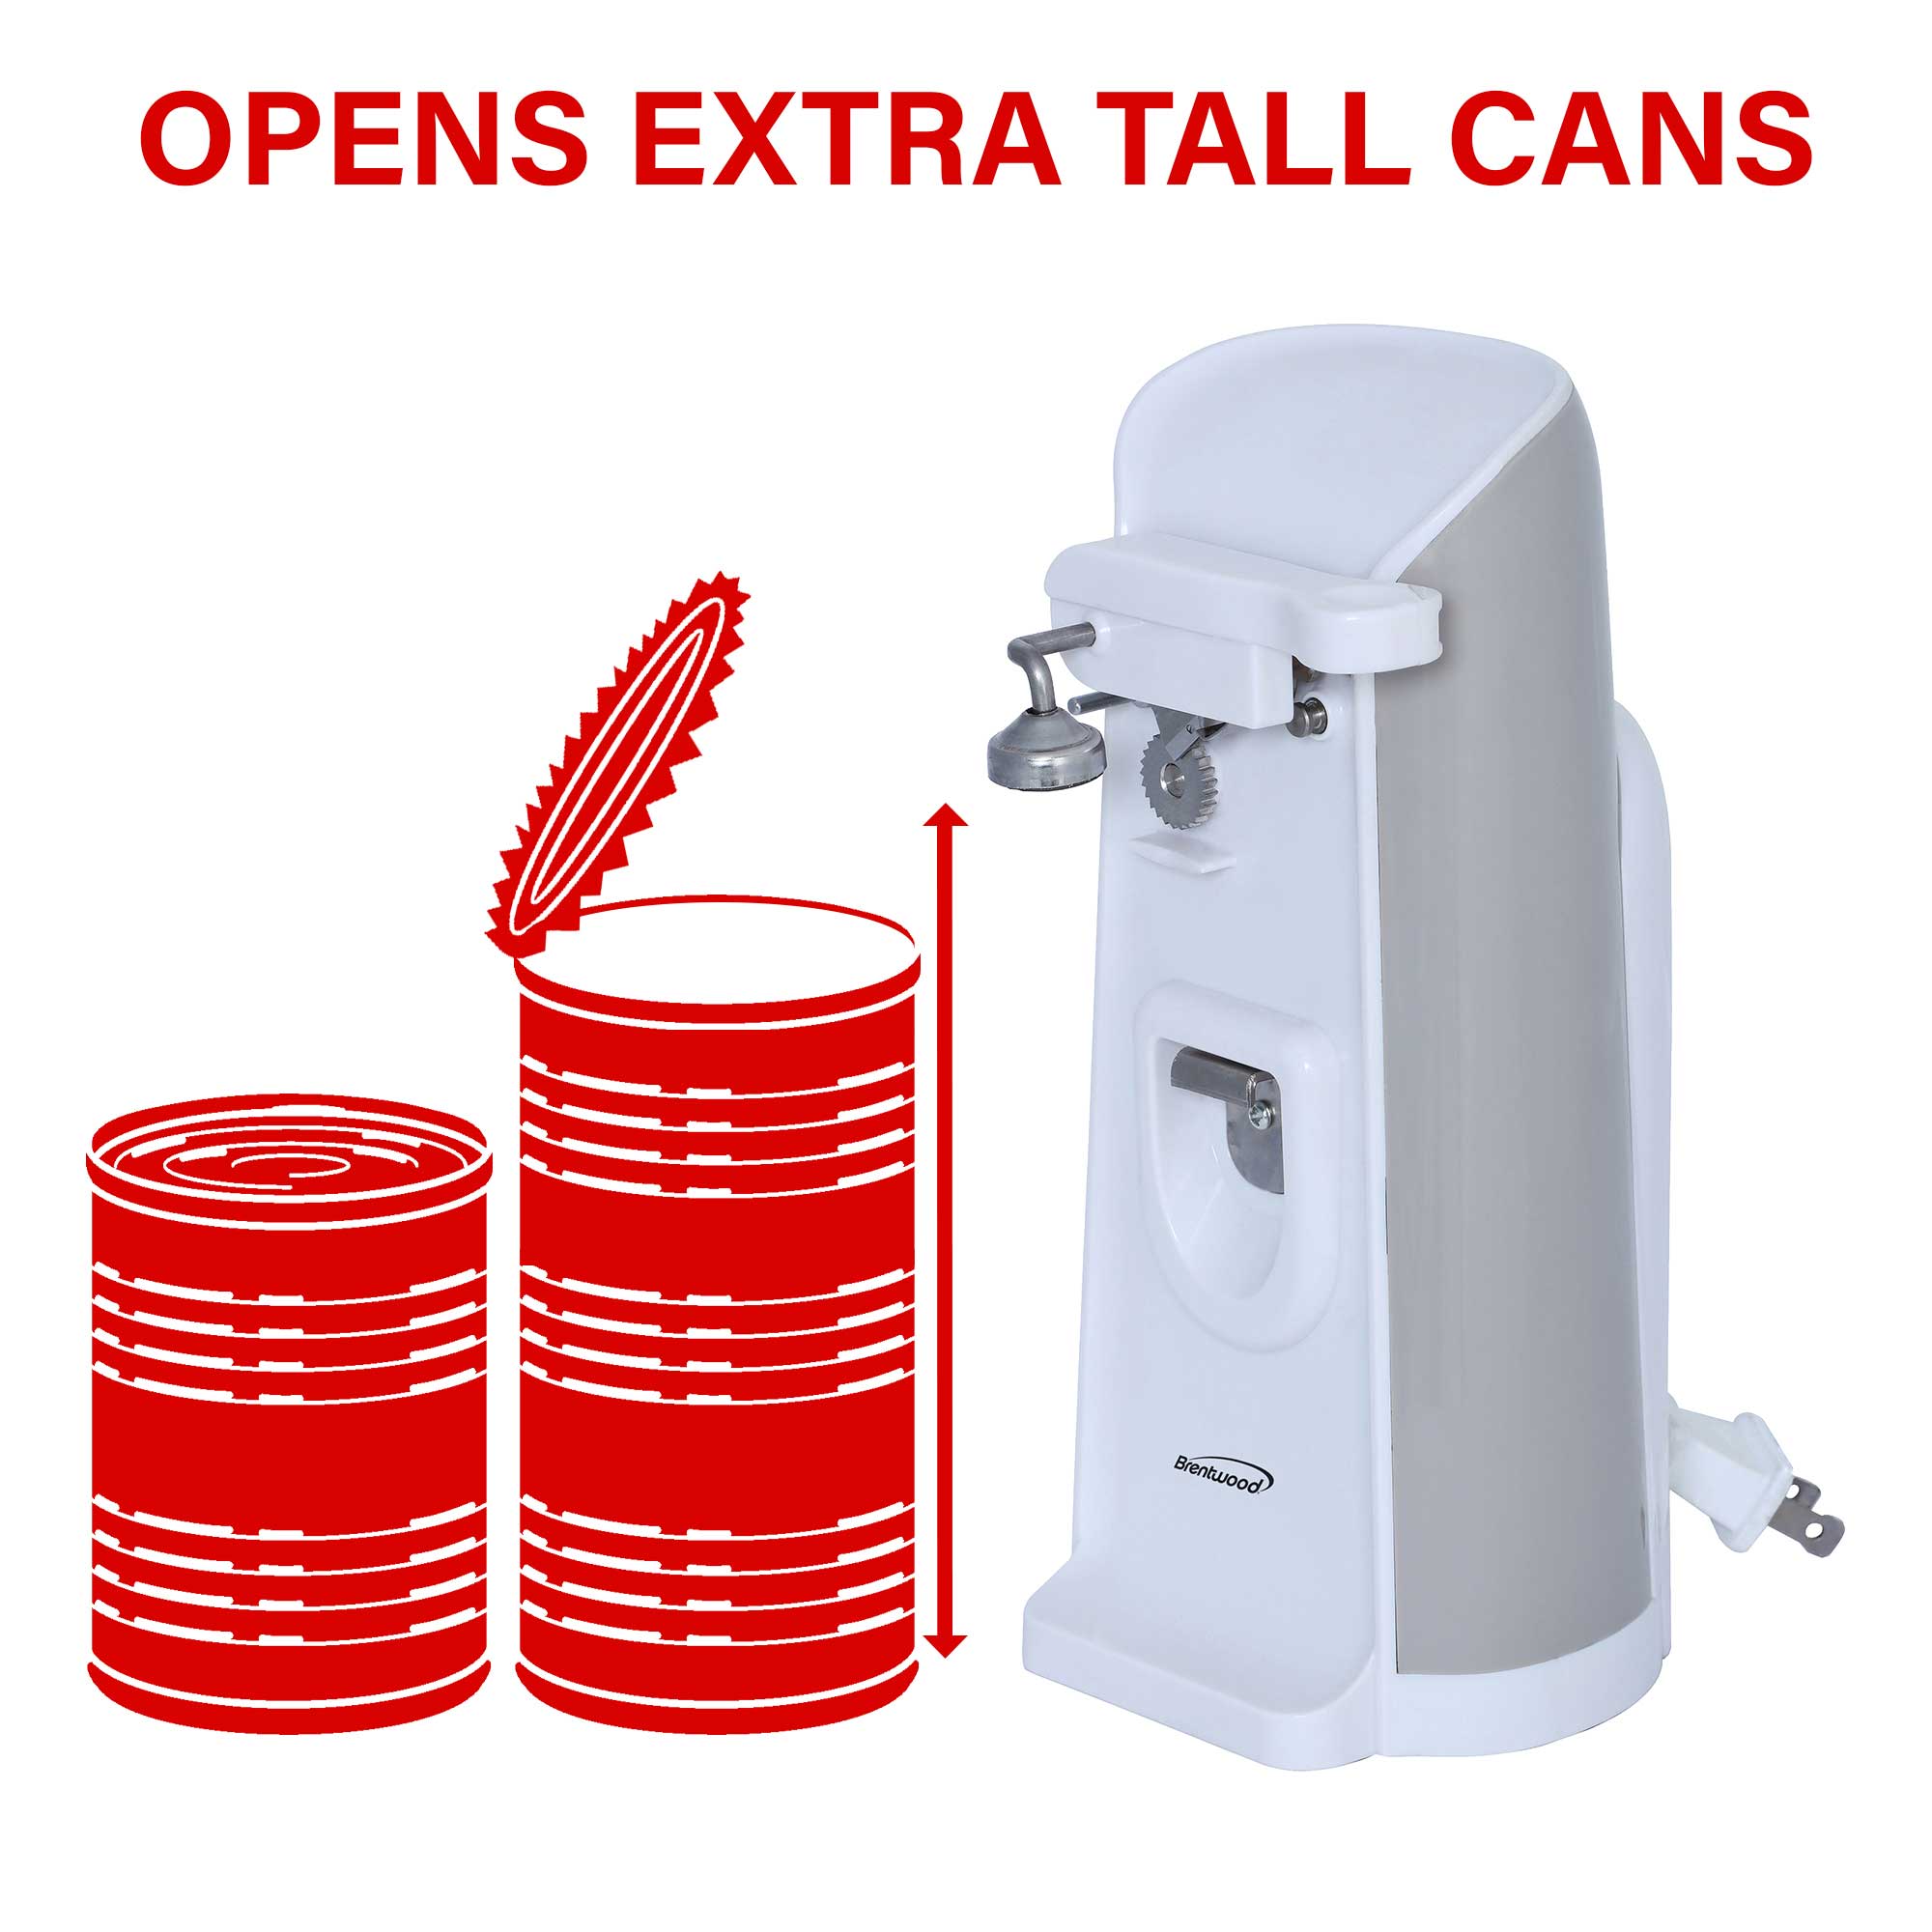 Brentwood J-30W Tall Electric Can Opener with Knife Sharpener